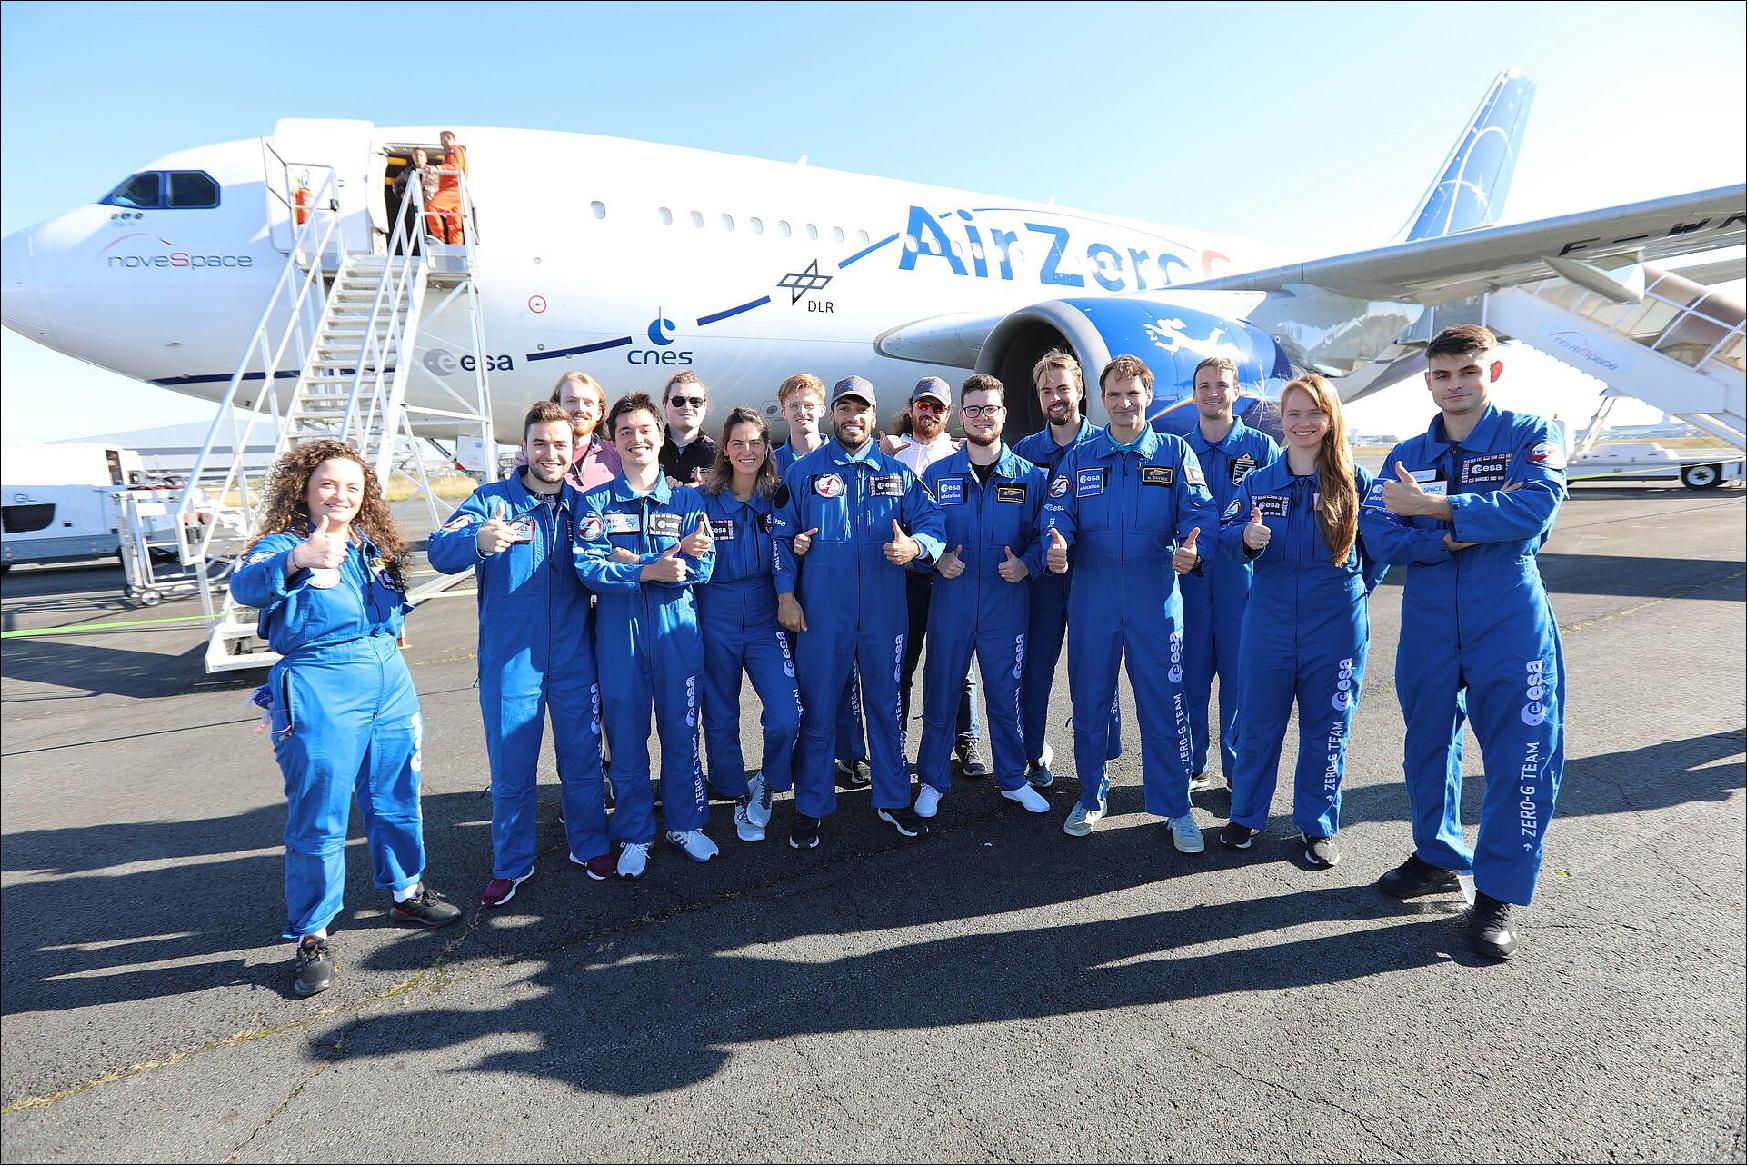 Figure 72: Fly Your Thesis! teams at the 77th ESA Parabolic Flight Campaign (image credit: Novespace)